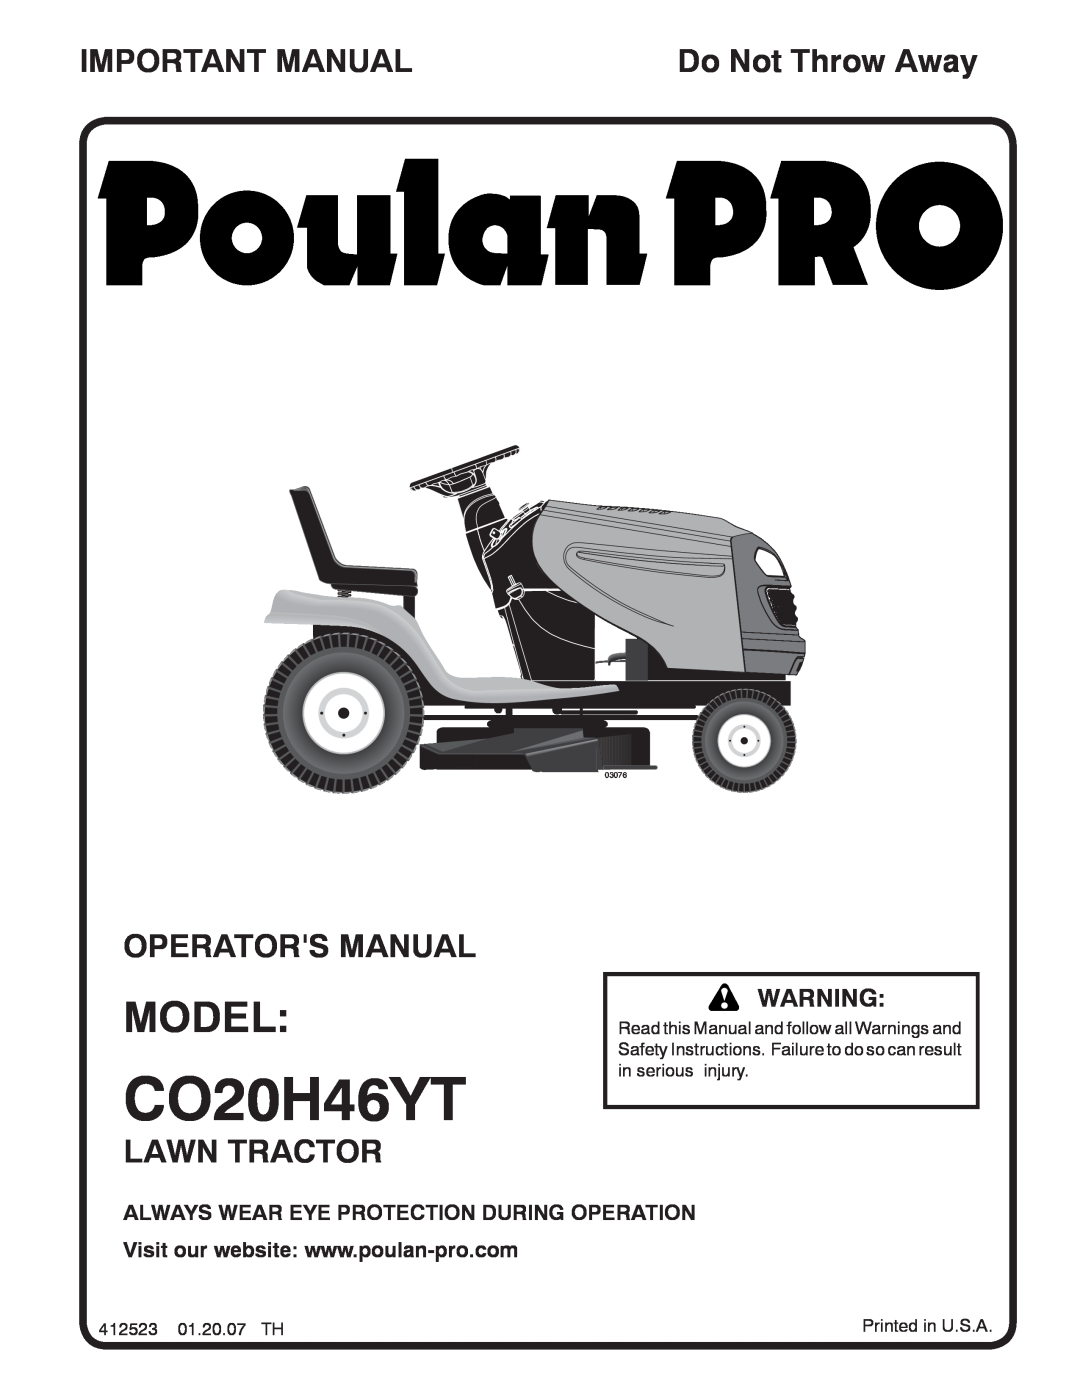 Poulan 96042004900 manual Model, Important Manual, Operators Manual, Lawn Tractor, Do Not Throw Away, CO20H46YT, 03076 